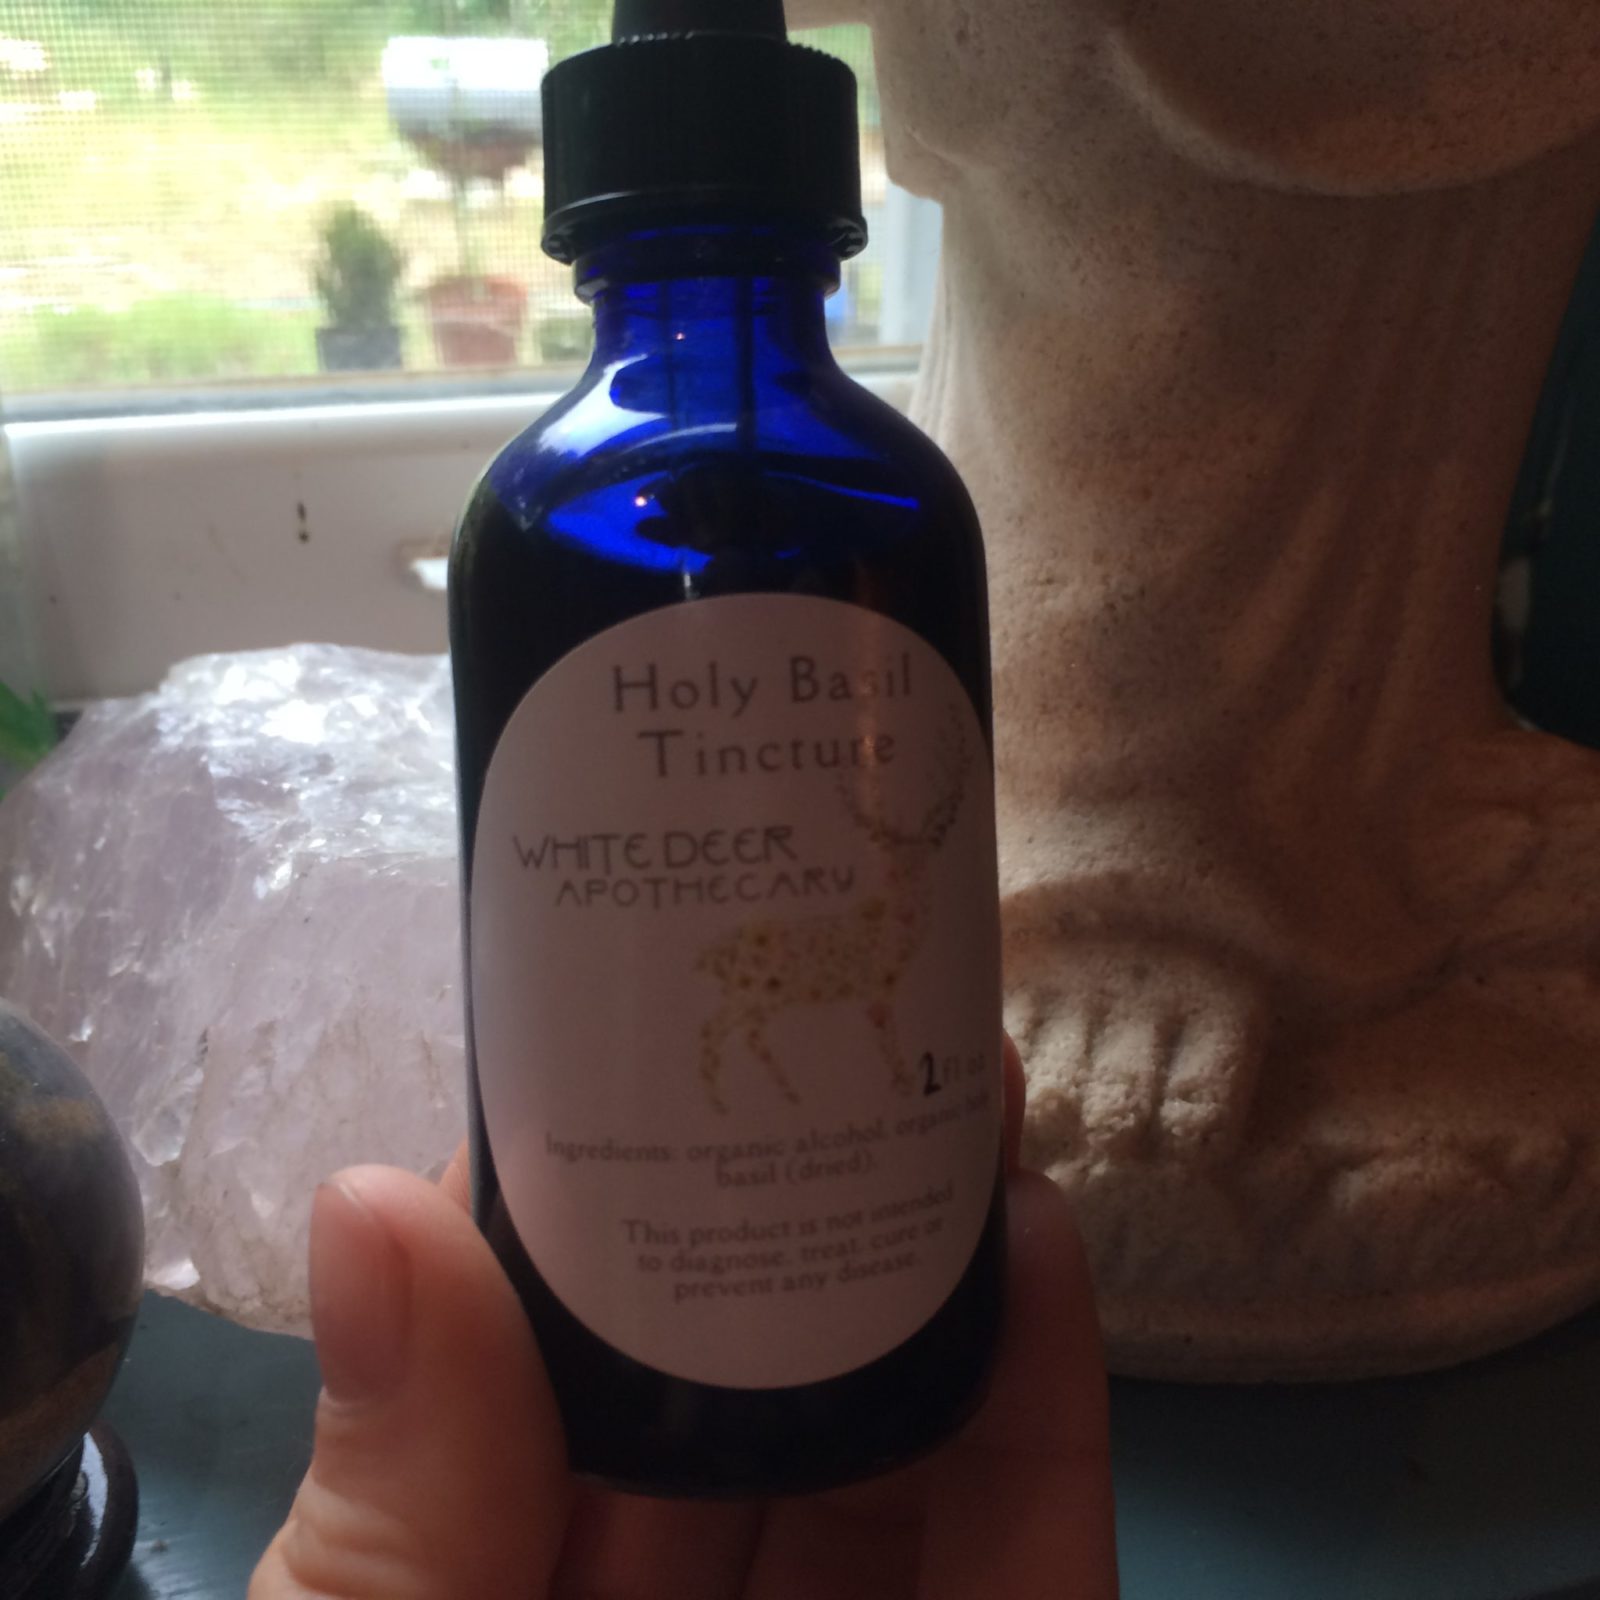 Holy Basil Tincture from White Deer Apothecary Austin Herbalist